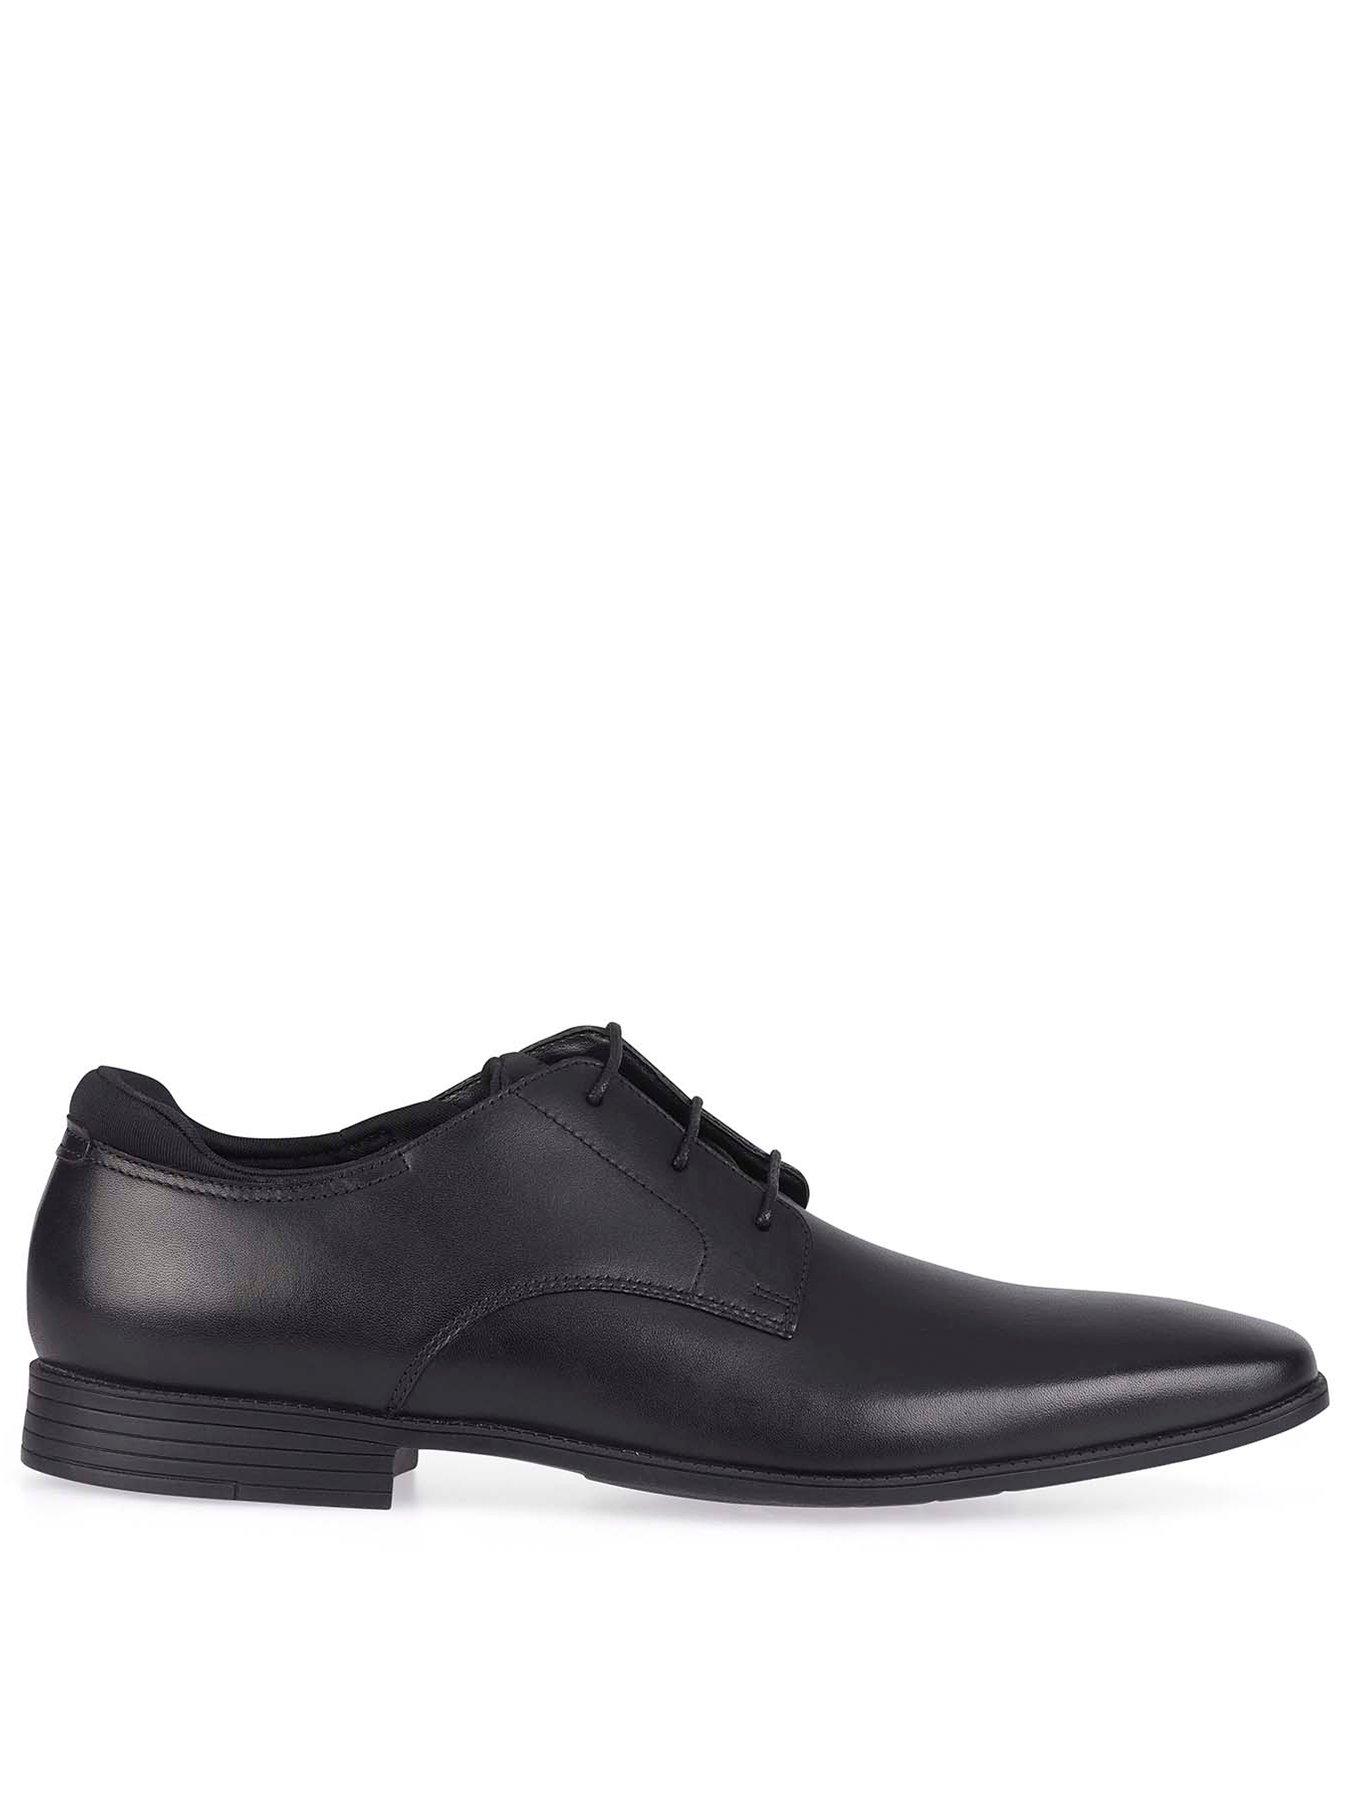  Academy Lace Up School Shoes - Black